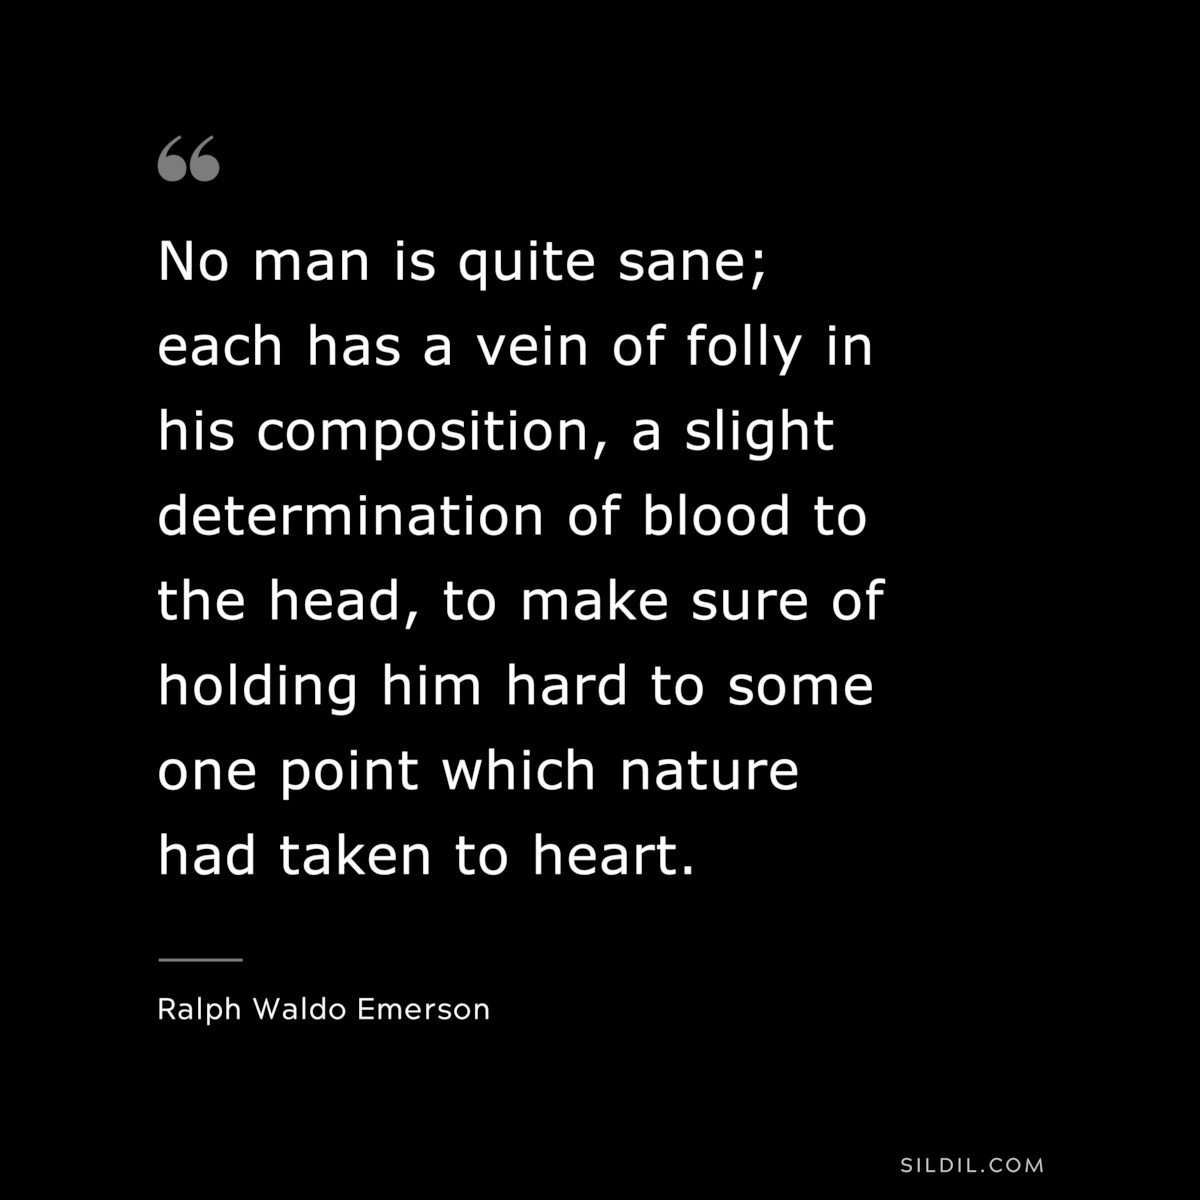 No man is quite sane; each has a vein of folly in his composition, a slight determination of blood to the head, to make sure of holding him hard to some one point which nature had taken to heart. — Ralph Waldo Emerson